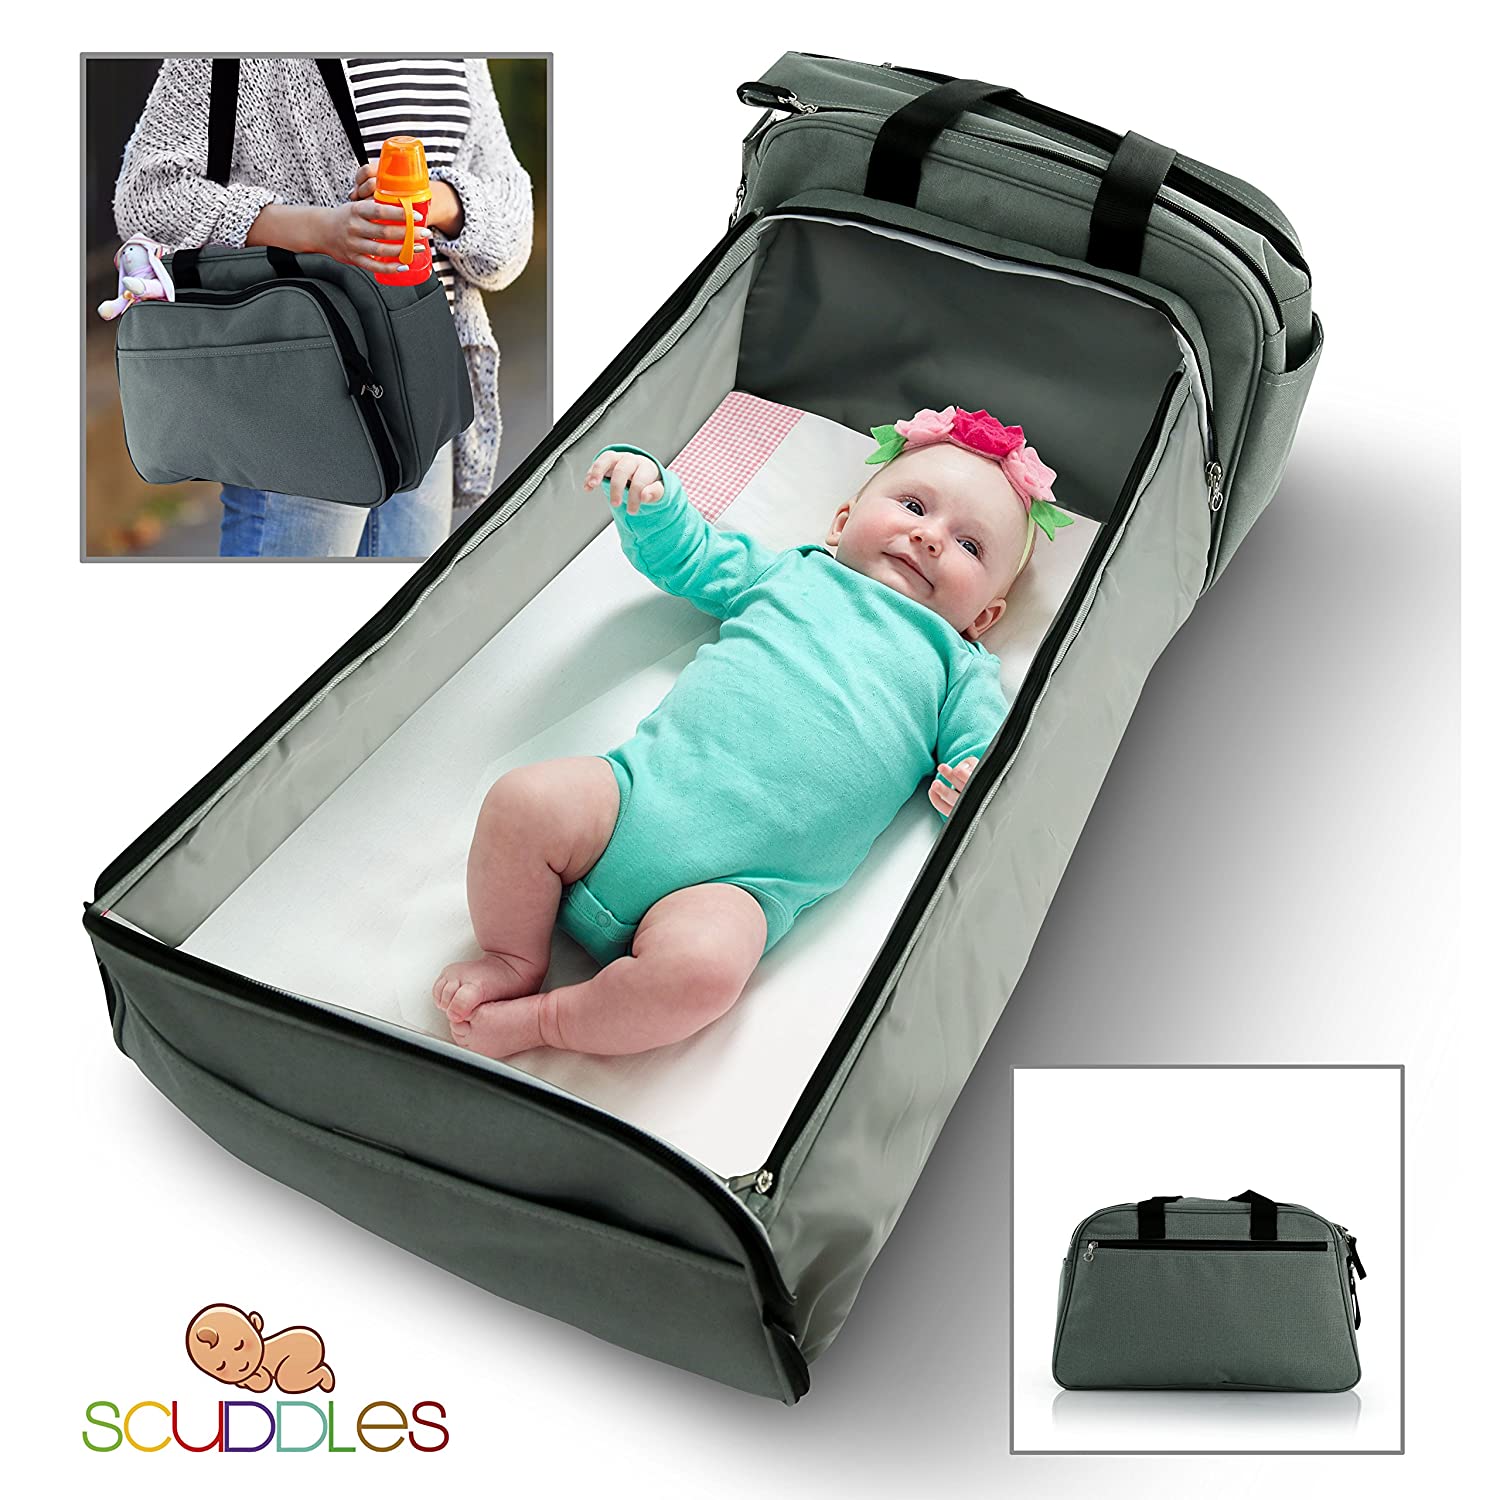 Scuddles 3-1 Portable Bassinet for Baby - Foldable Baby Bed - Travel Bassinet Functions As Diaper Bag